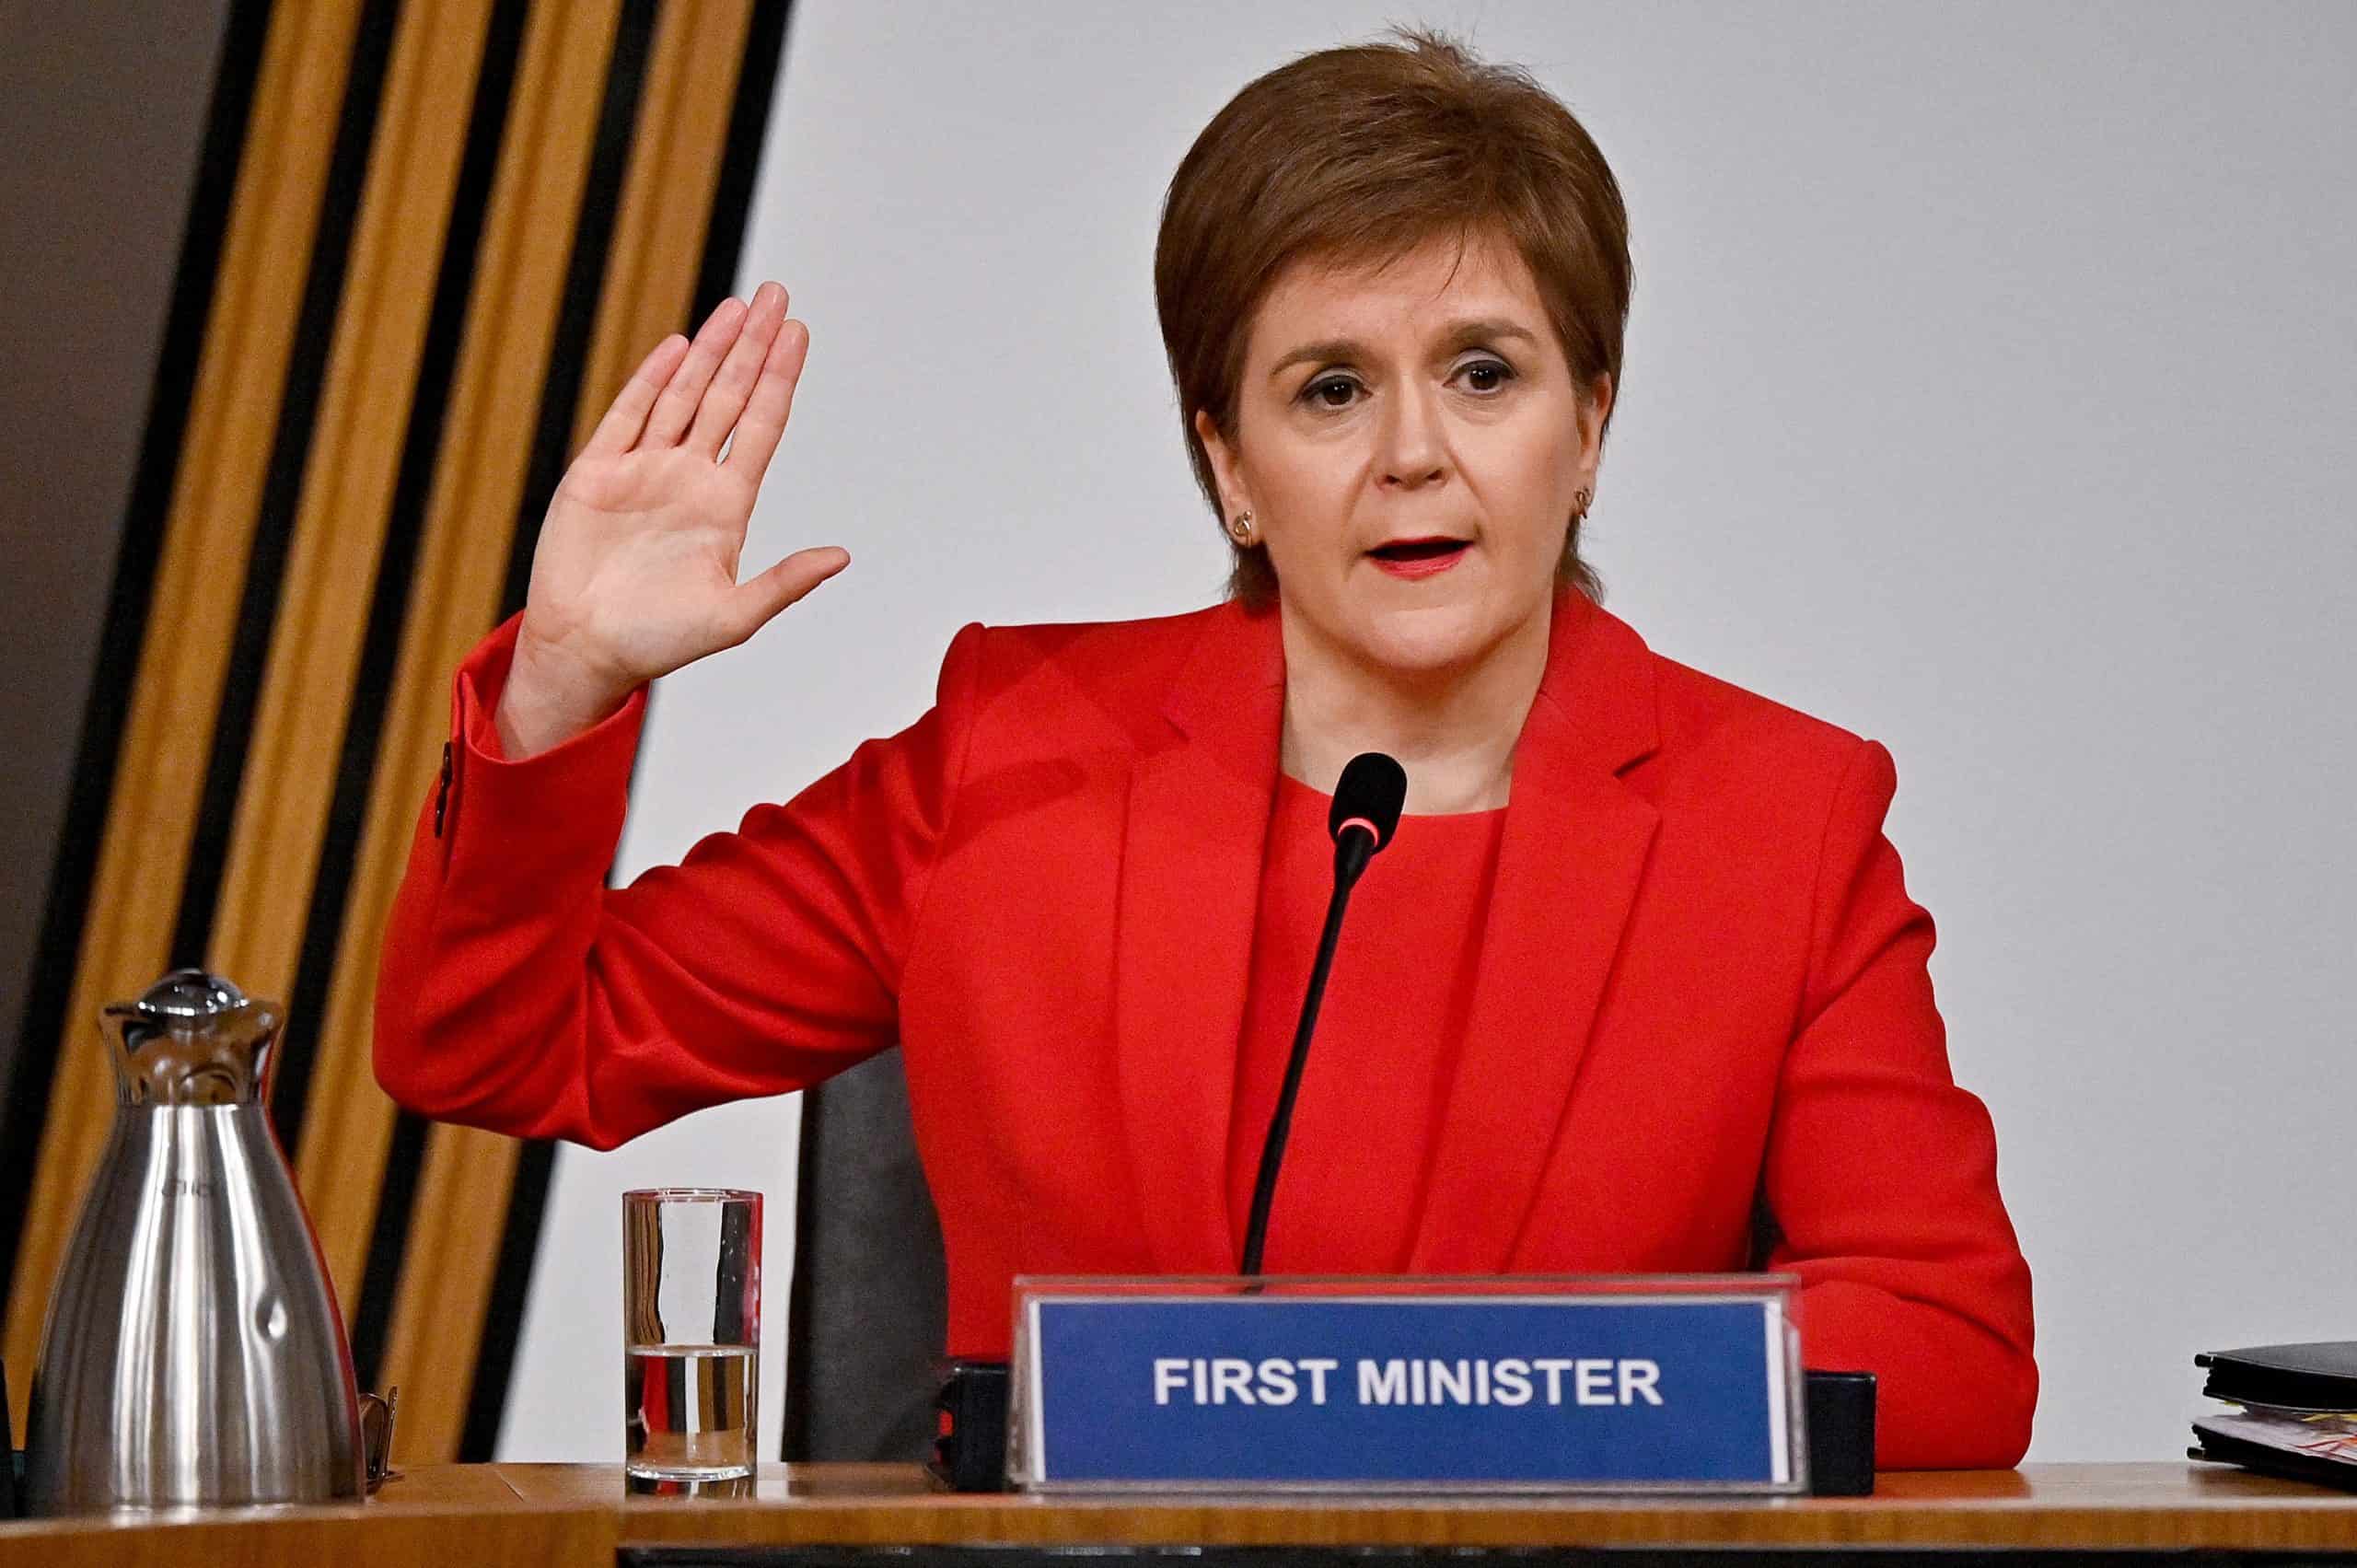 Sturgeon rejects plot claim: ‘I never wanted to ‘get’ Alex Salmond’